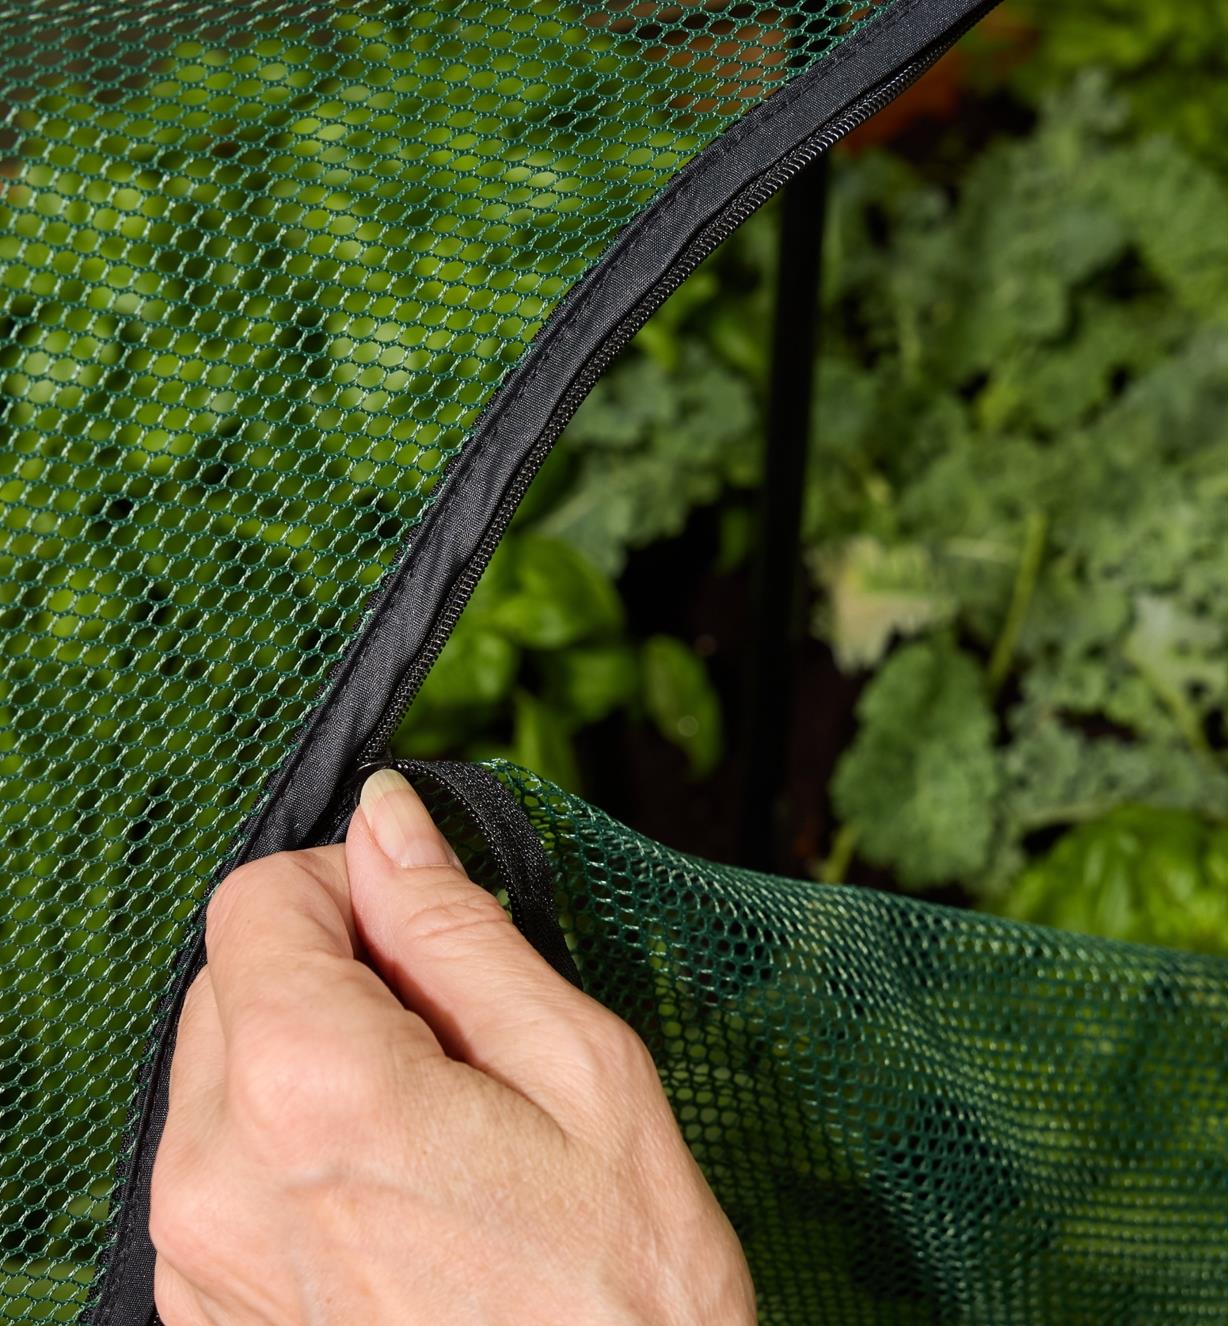 A gardener unzips the zippered panel on the umbrella plant dome